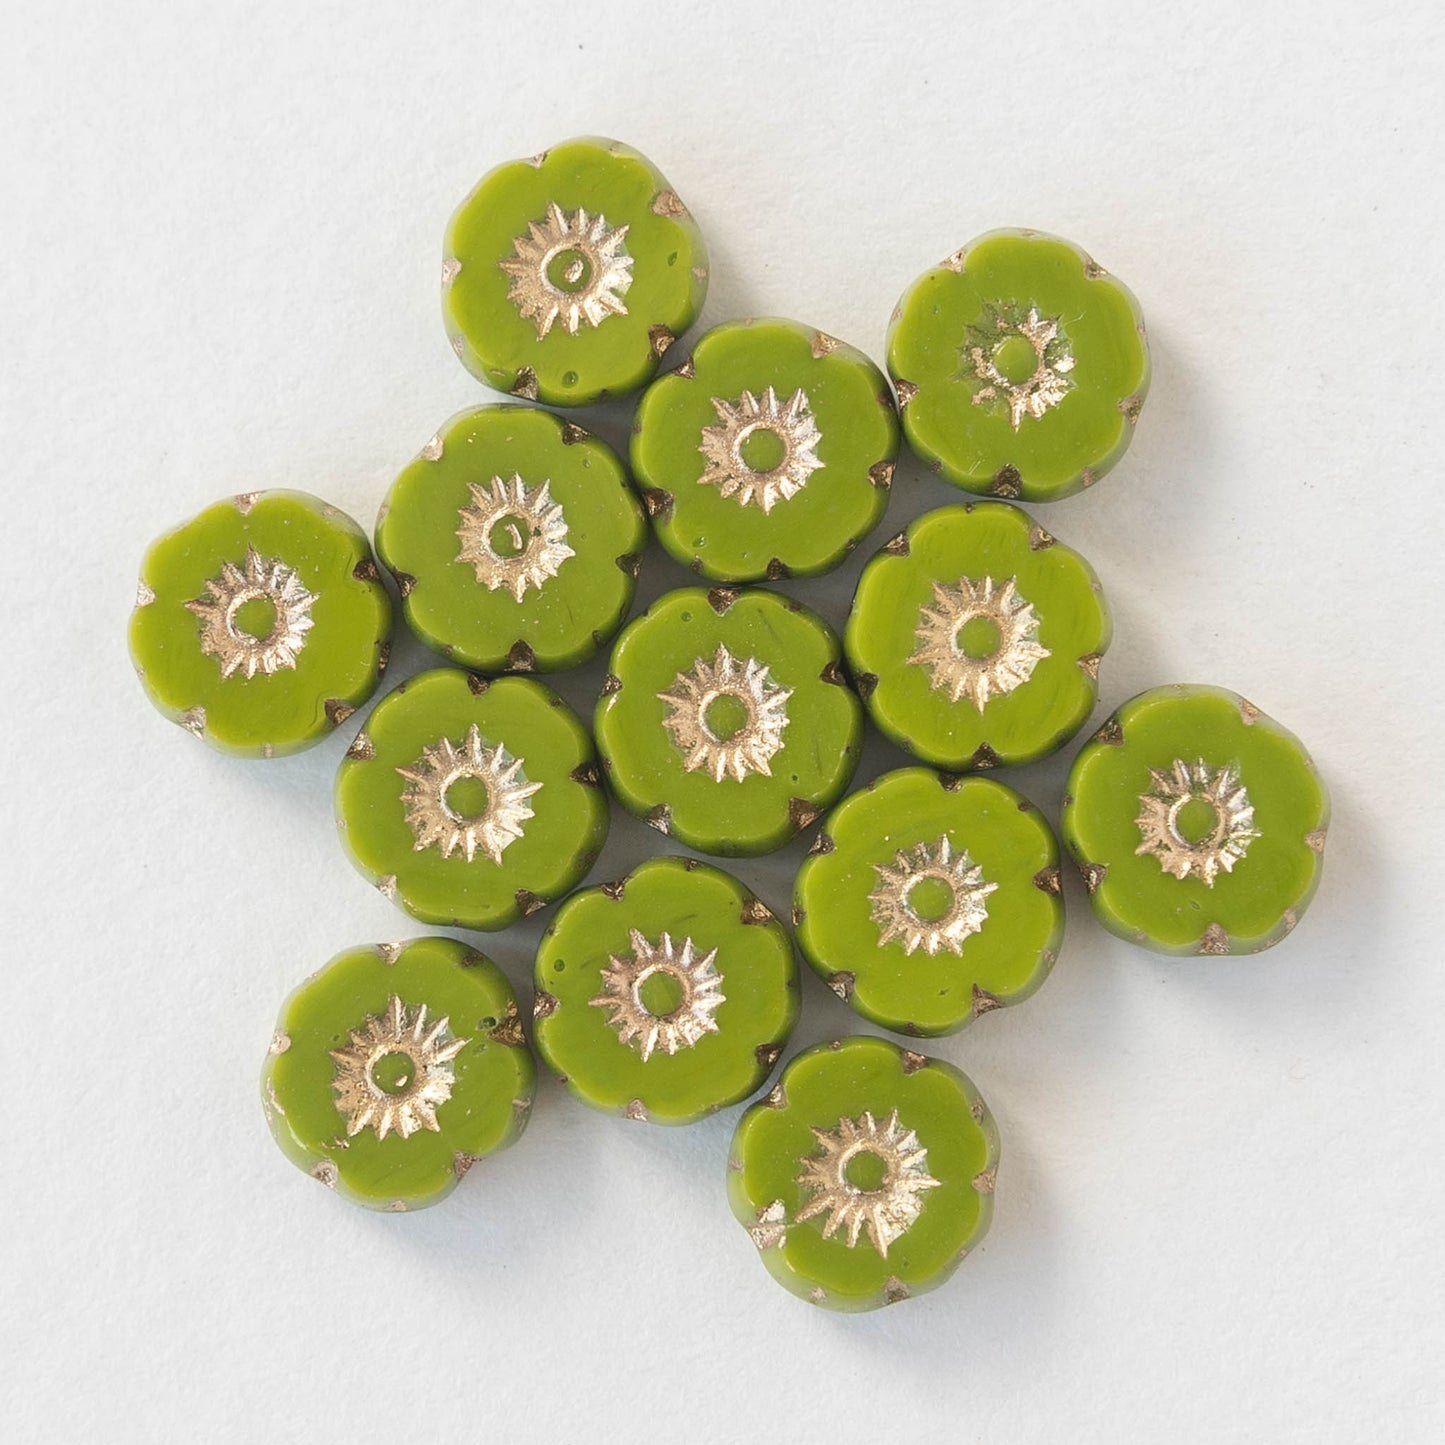 8mm Glass Flower Beads - Opaque Olive Green - 20 beads